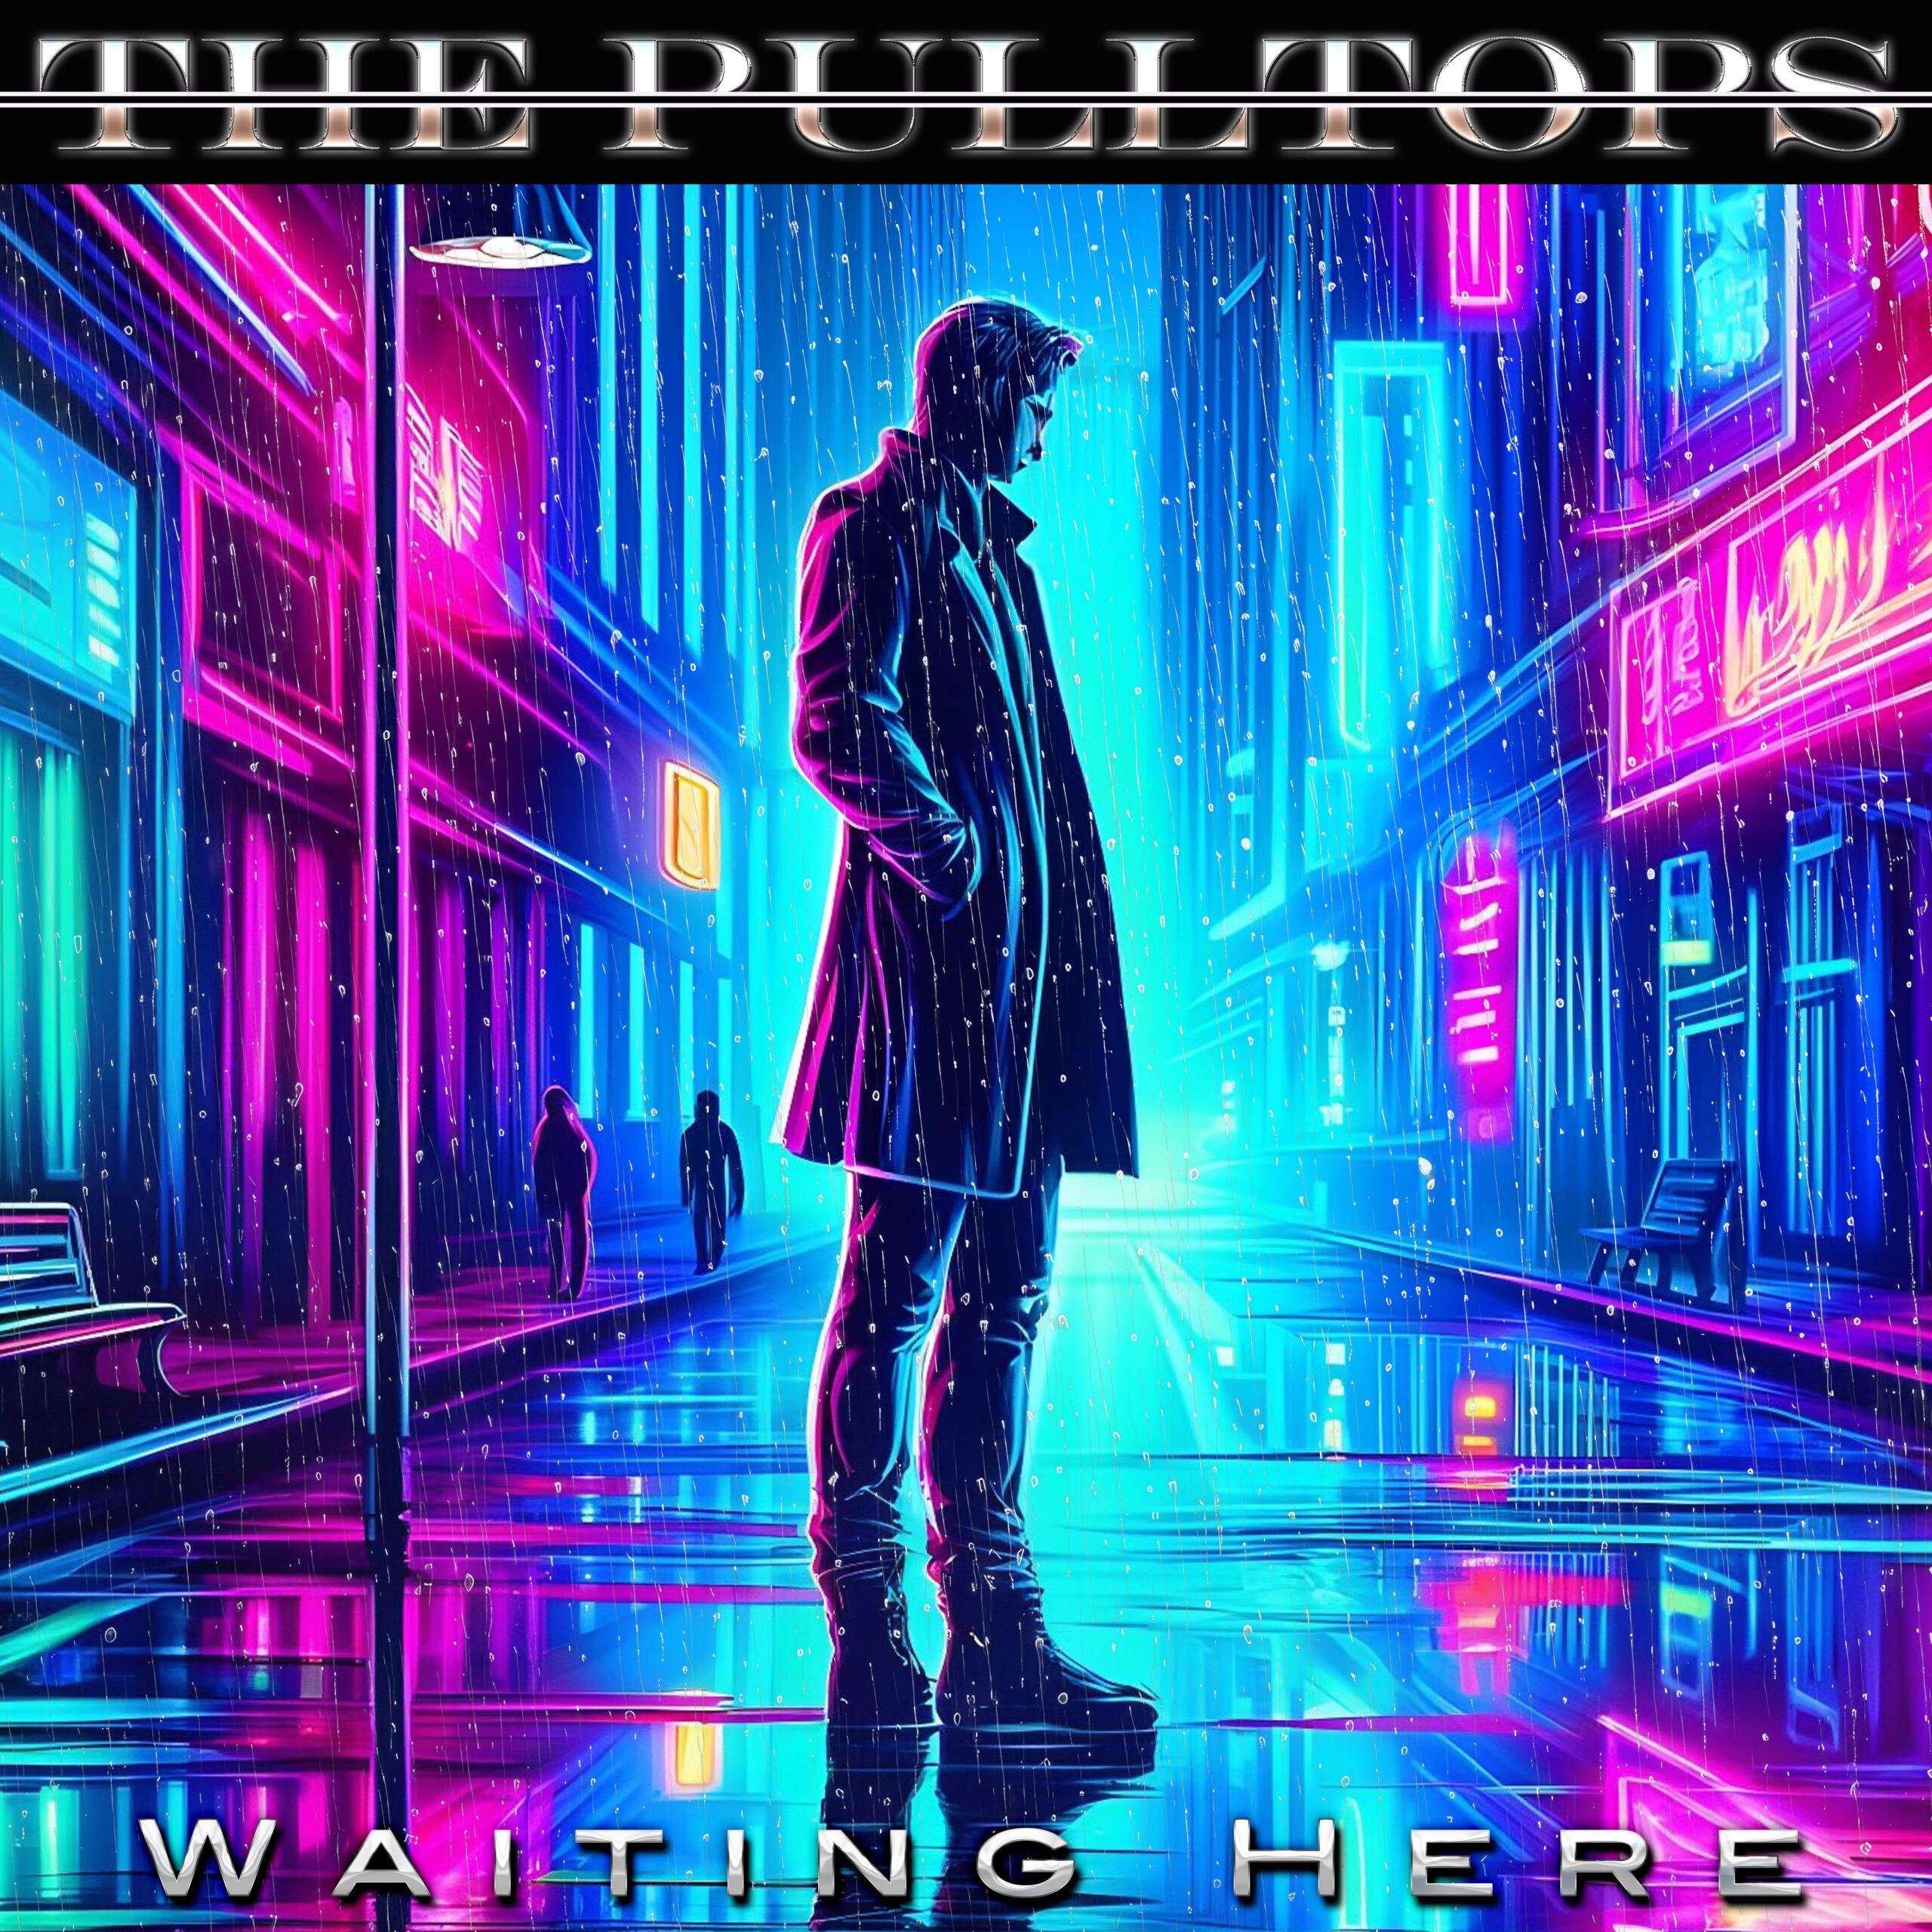 The Pulltops – “Waiting Here”